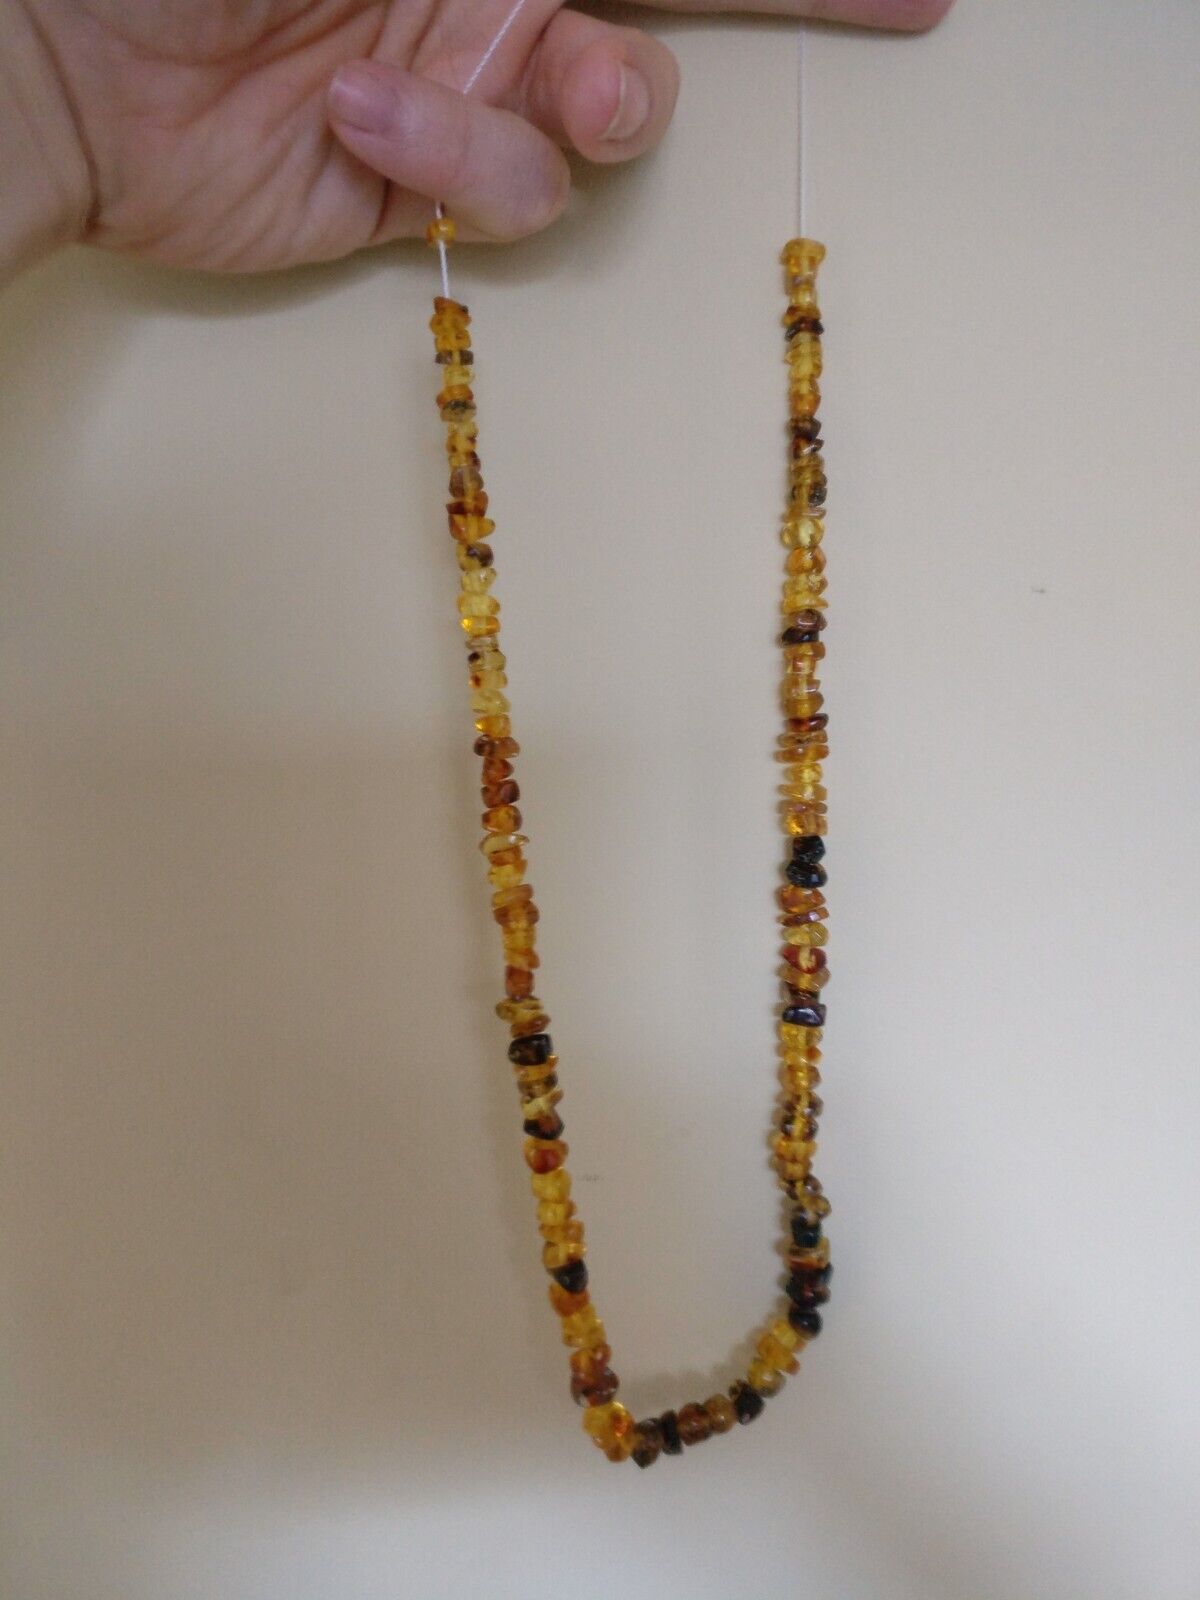 Mexican Chiapas Miocene Fossil Amber Necklace.